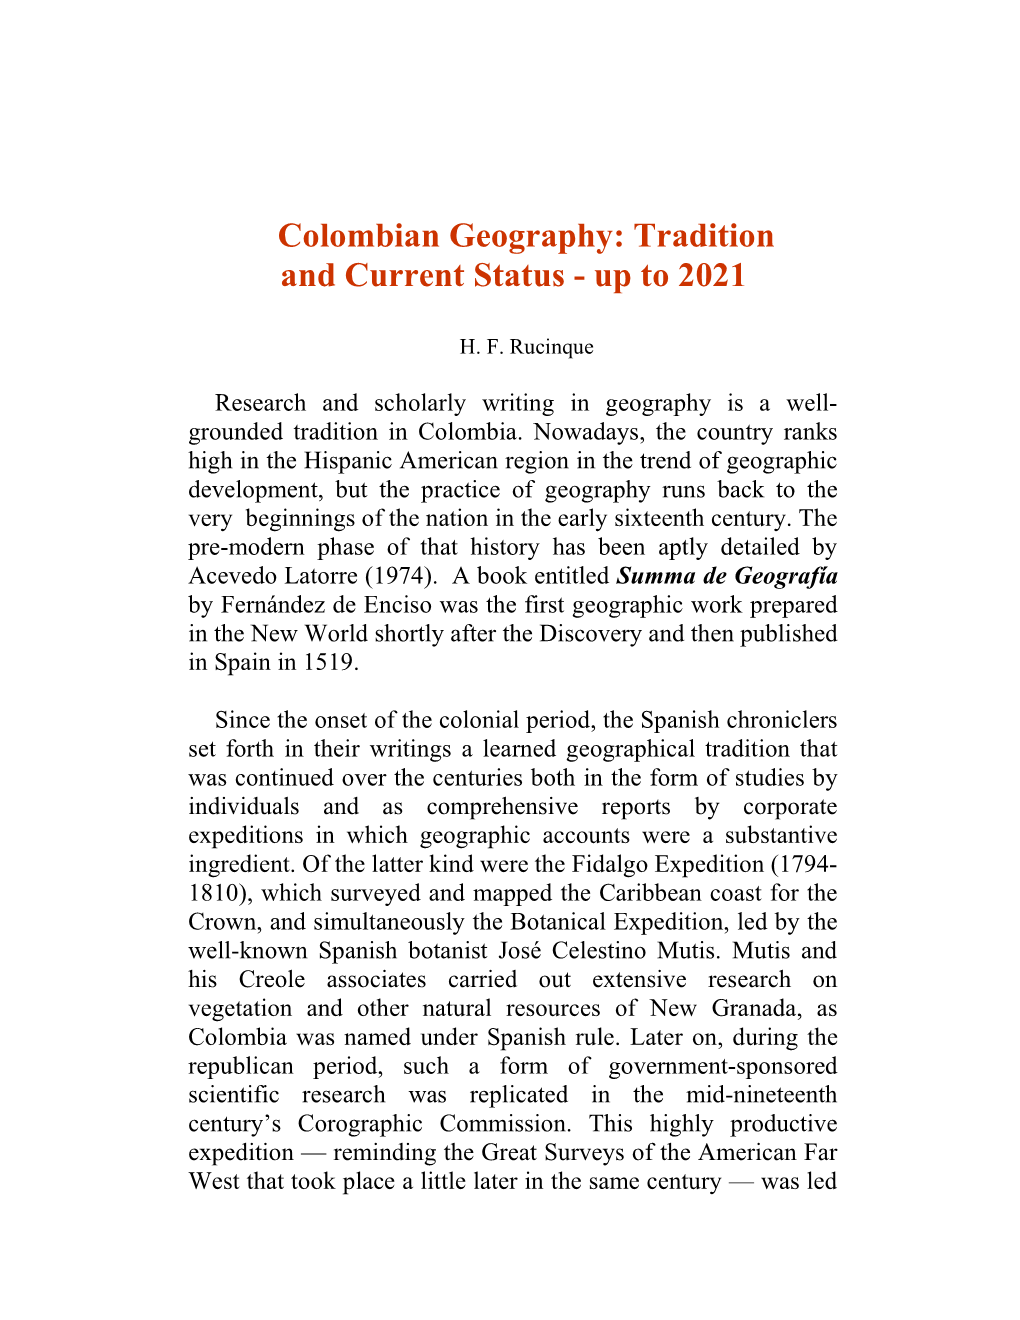 Colombian Geography: Tradition and Current Status - up to 2021